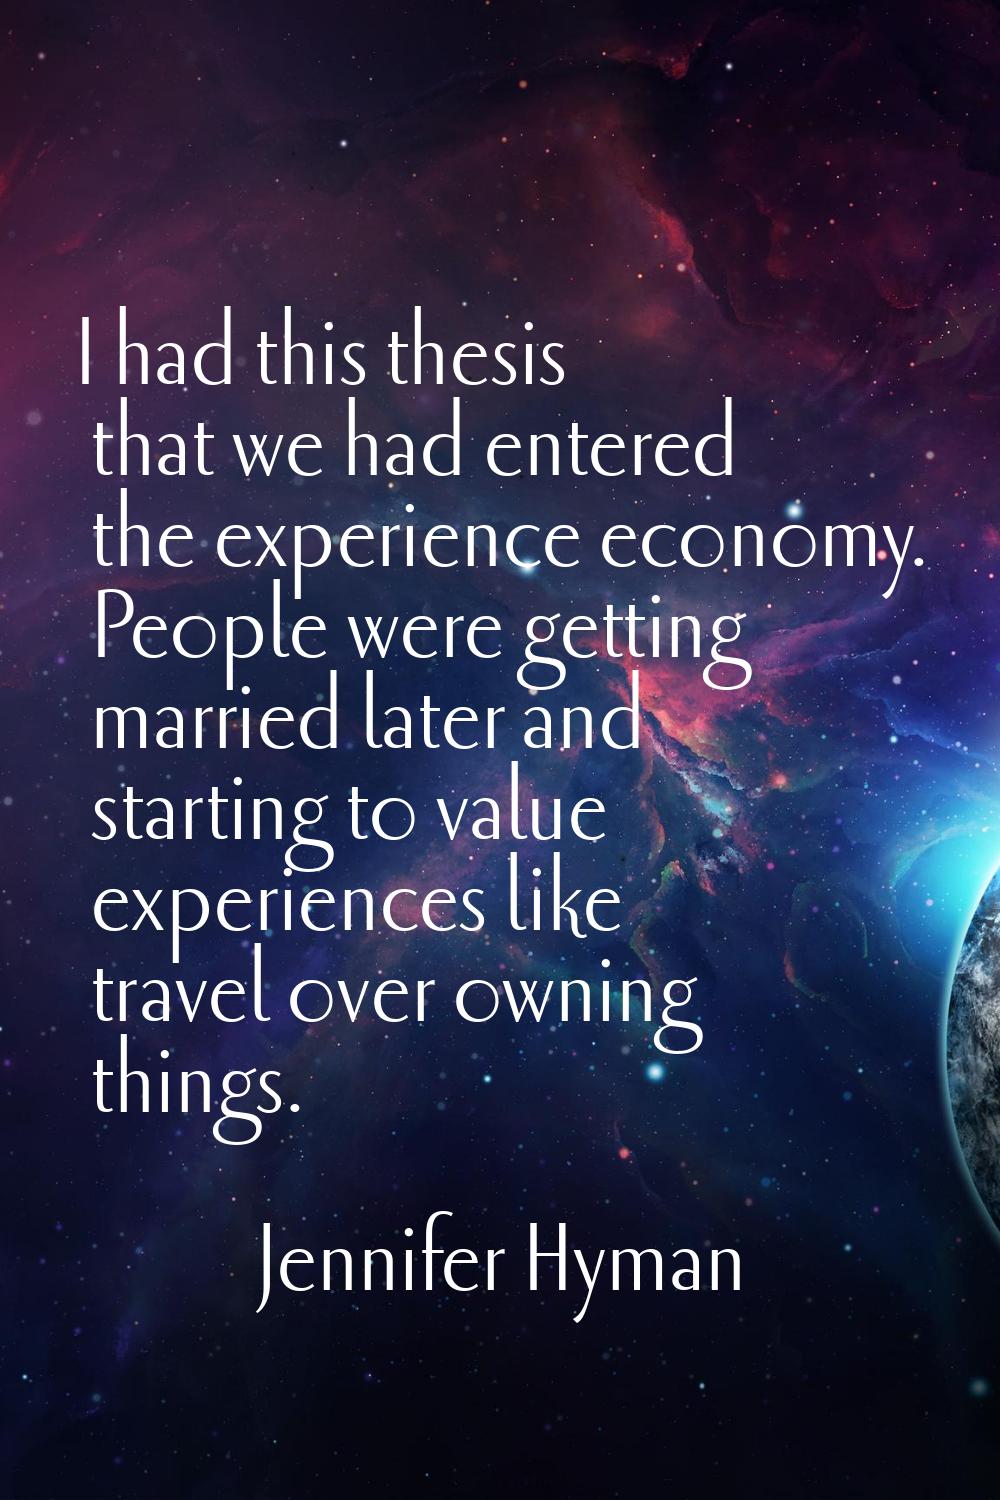 I had this thesis that we had entered the experience economy. People were getting married later and